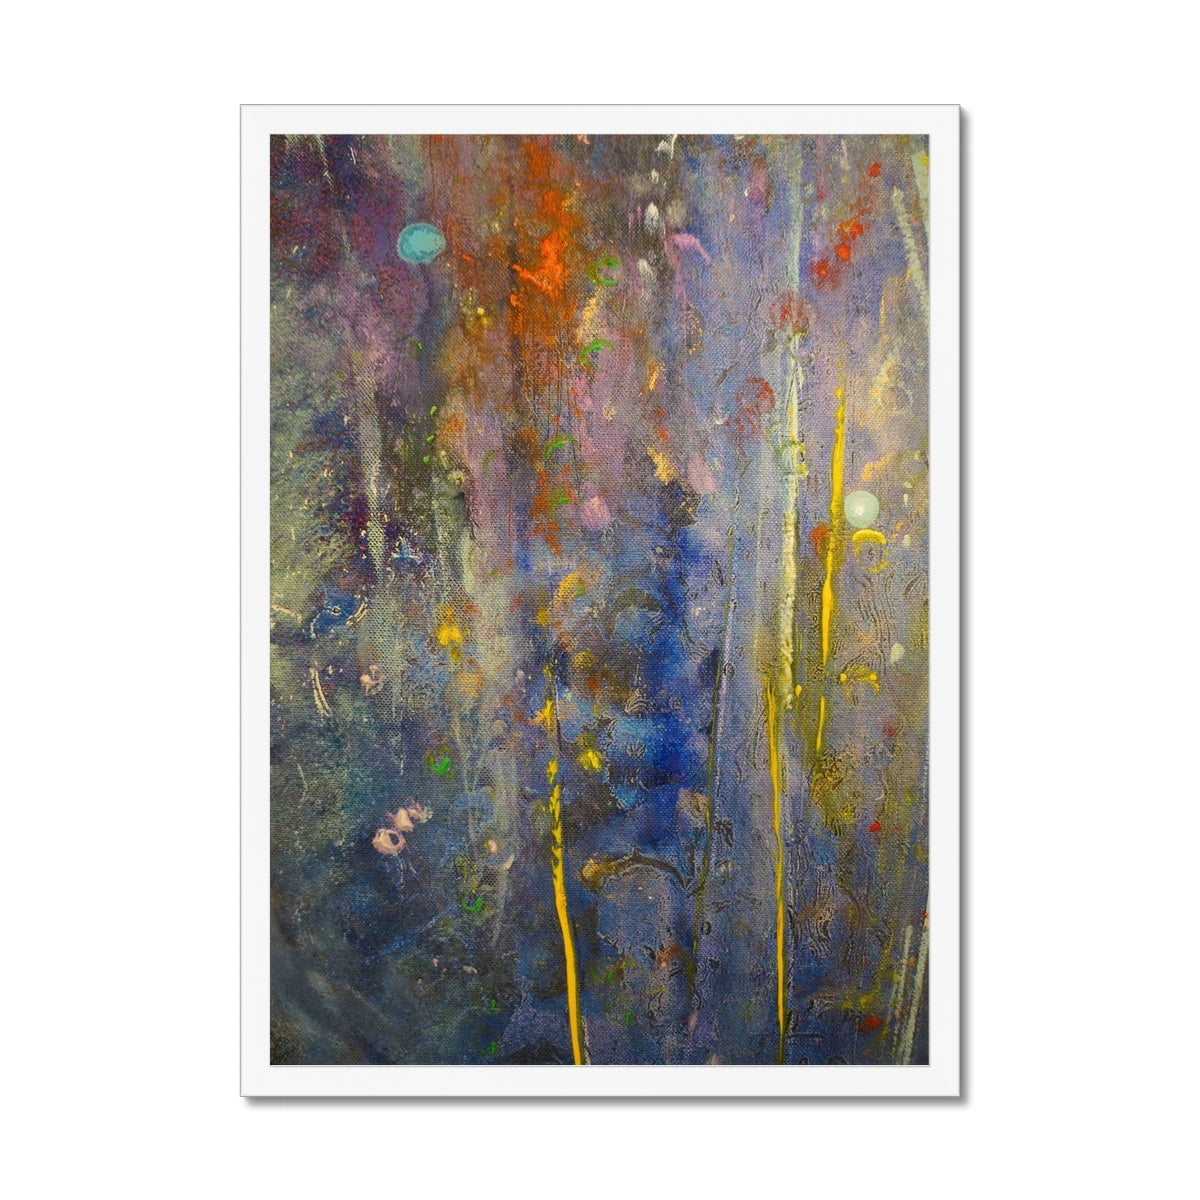 Cairngorms Waterfall Abstract Painting | Framed Prints From Scotland-Framed Prints-Abstract & Impressionistic Art Gallery-A2 Portrait-White Frame-Paintings, Prints, Homeware, Art Gifts From Scotland By Scottish Artist Kevin Hunter